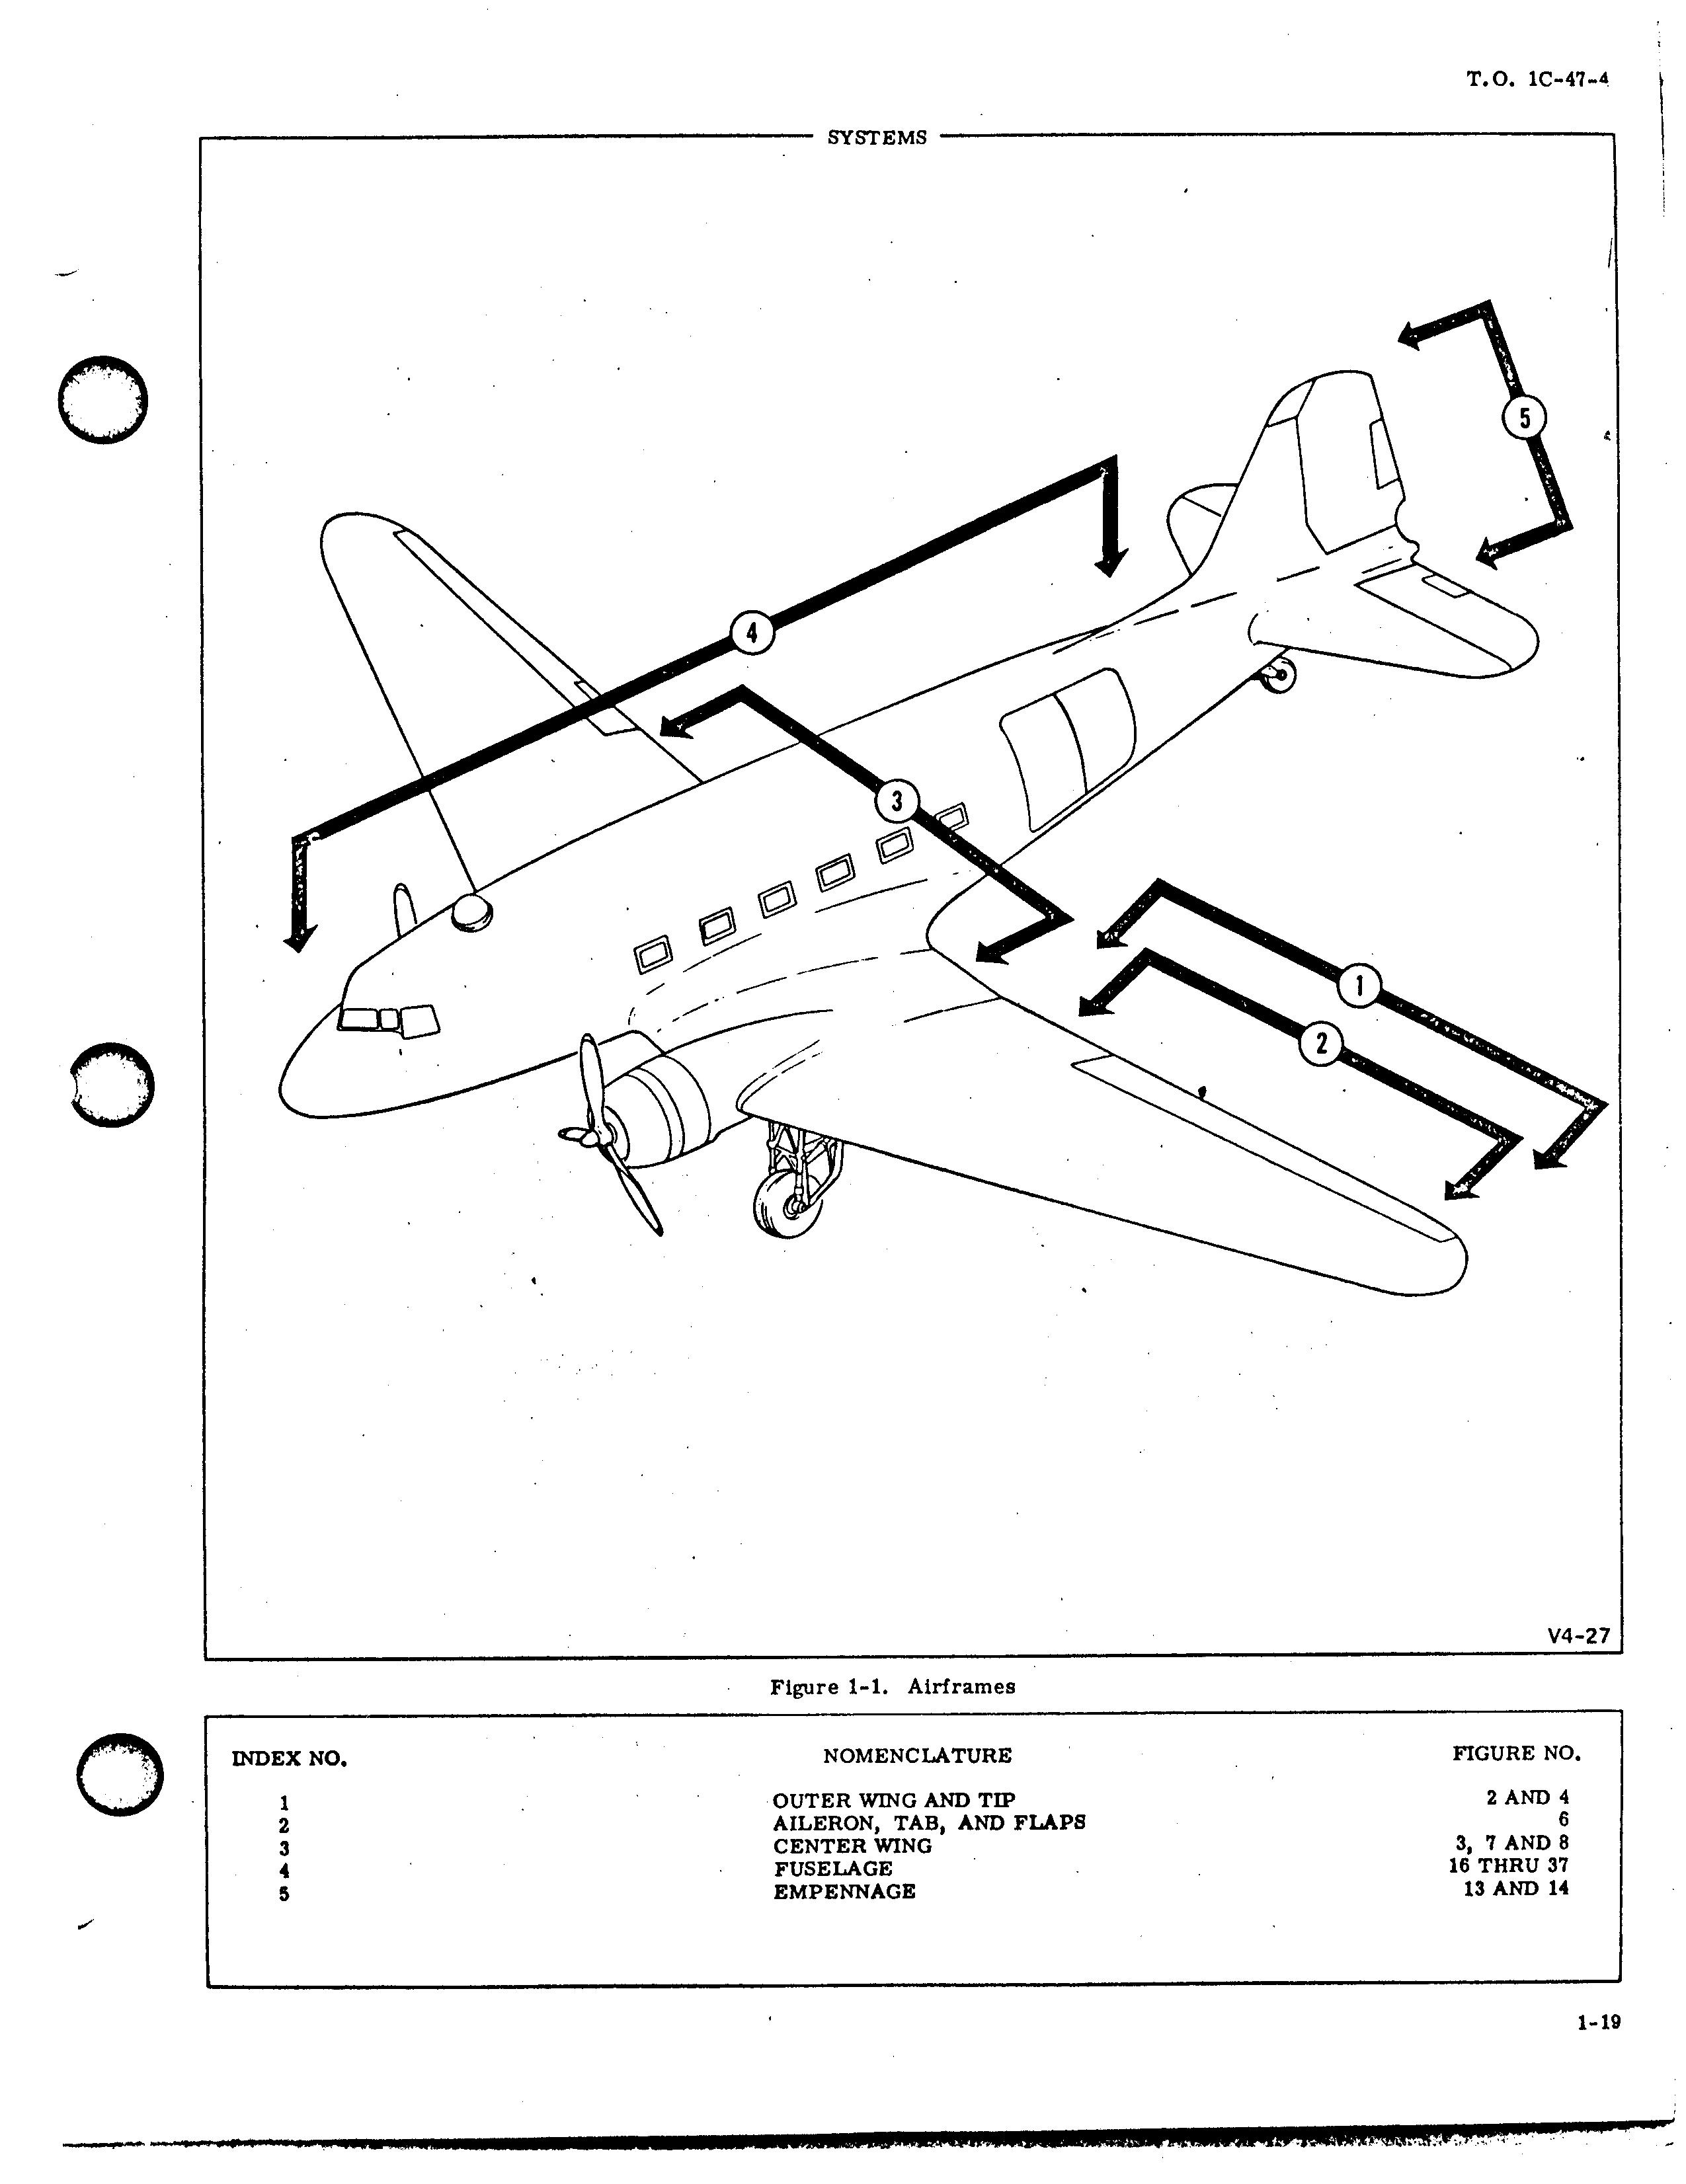 Sample page 33 from AirCorps Library document: Illustrated Parts Breakdown for C-47A, C-47B, C-47D, C-117A, and C-117B